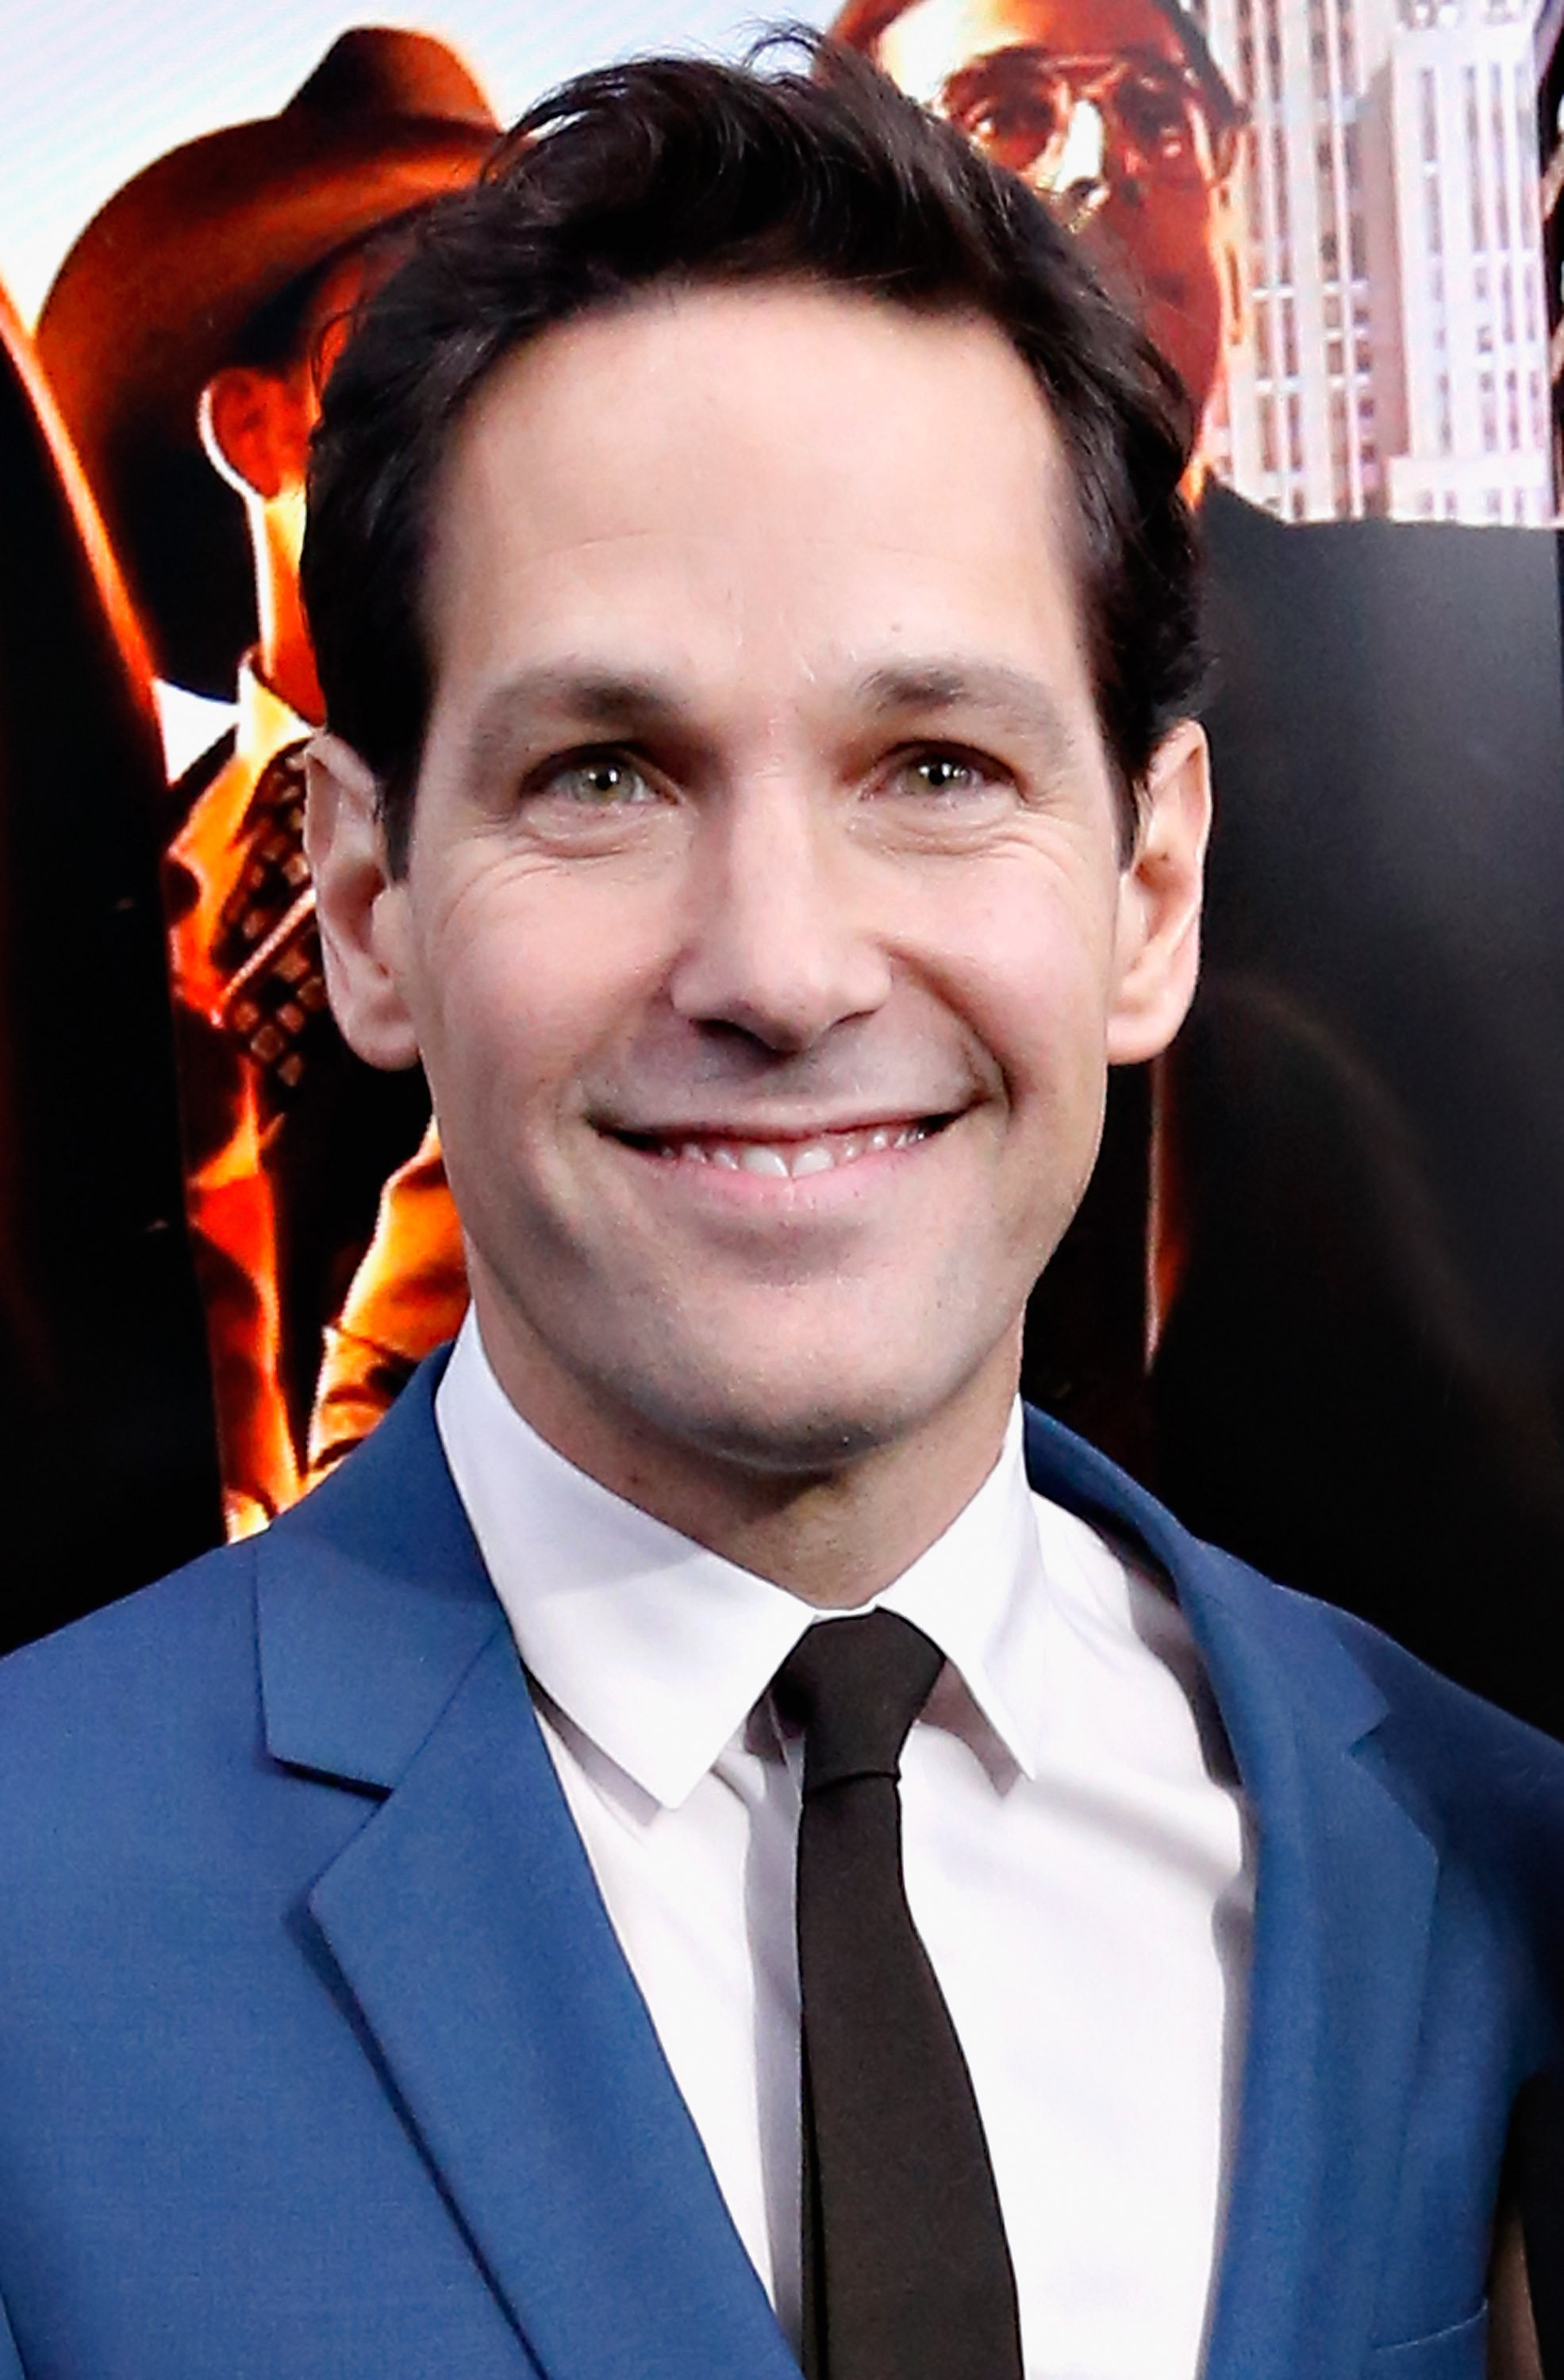 Paul Rudd became Ant-Man and remained Paul Rudd - The